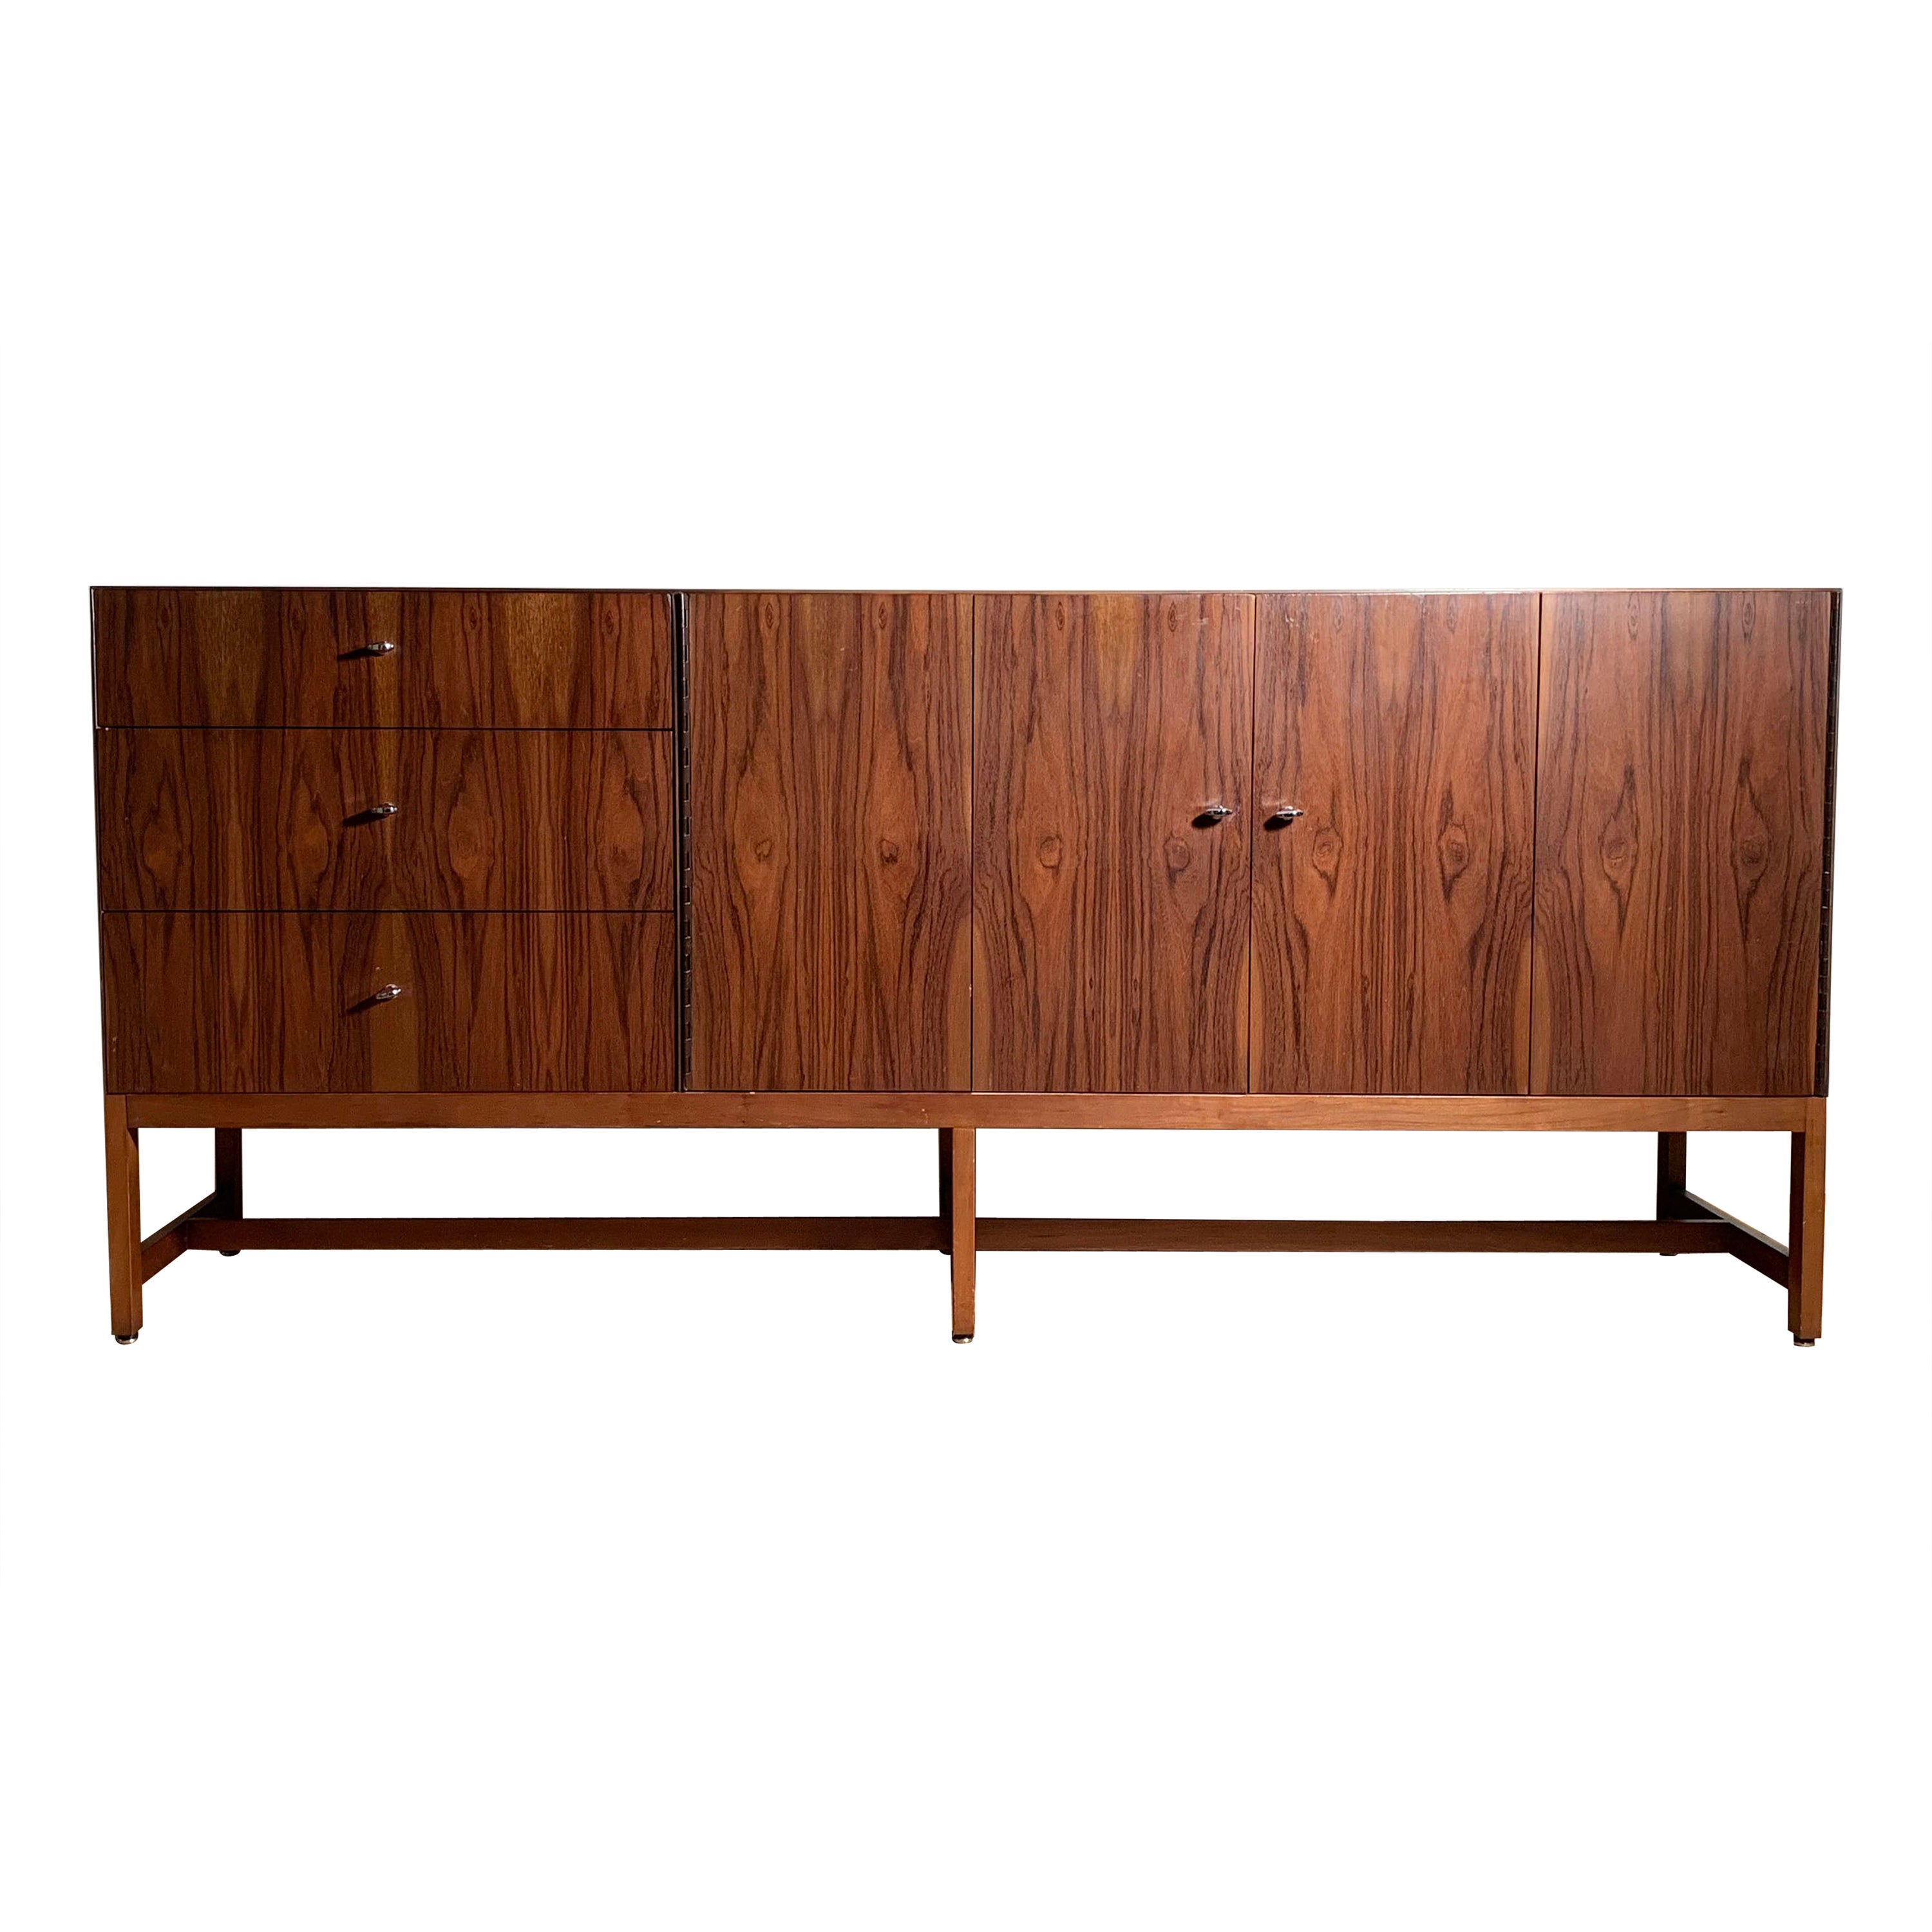 Vintage Exotic Wood Sideboard Cabinet by Milo Baughman for Directional For Sale